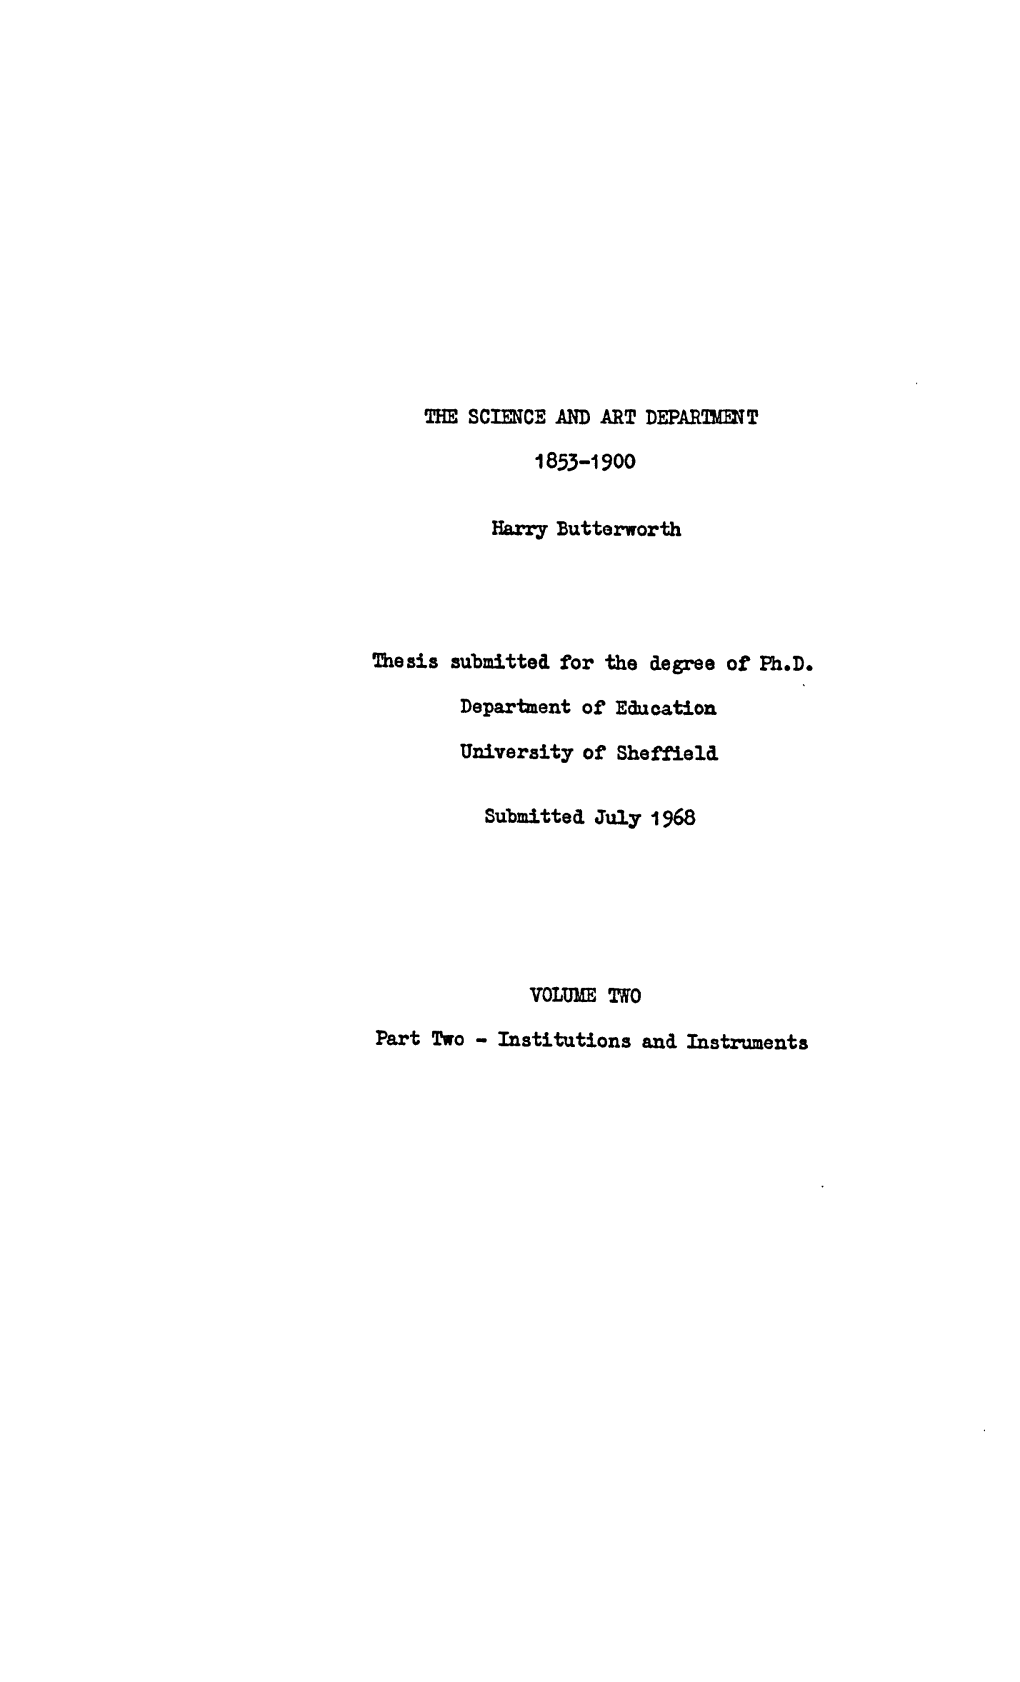 THE SCIENCE and ART DEPARTMENT 1853-1900 Thesis